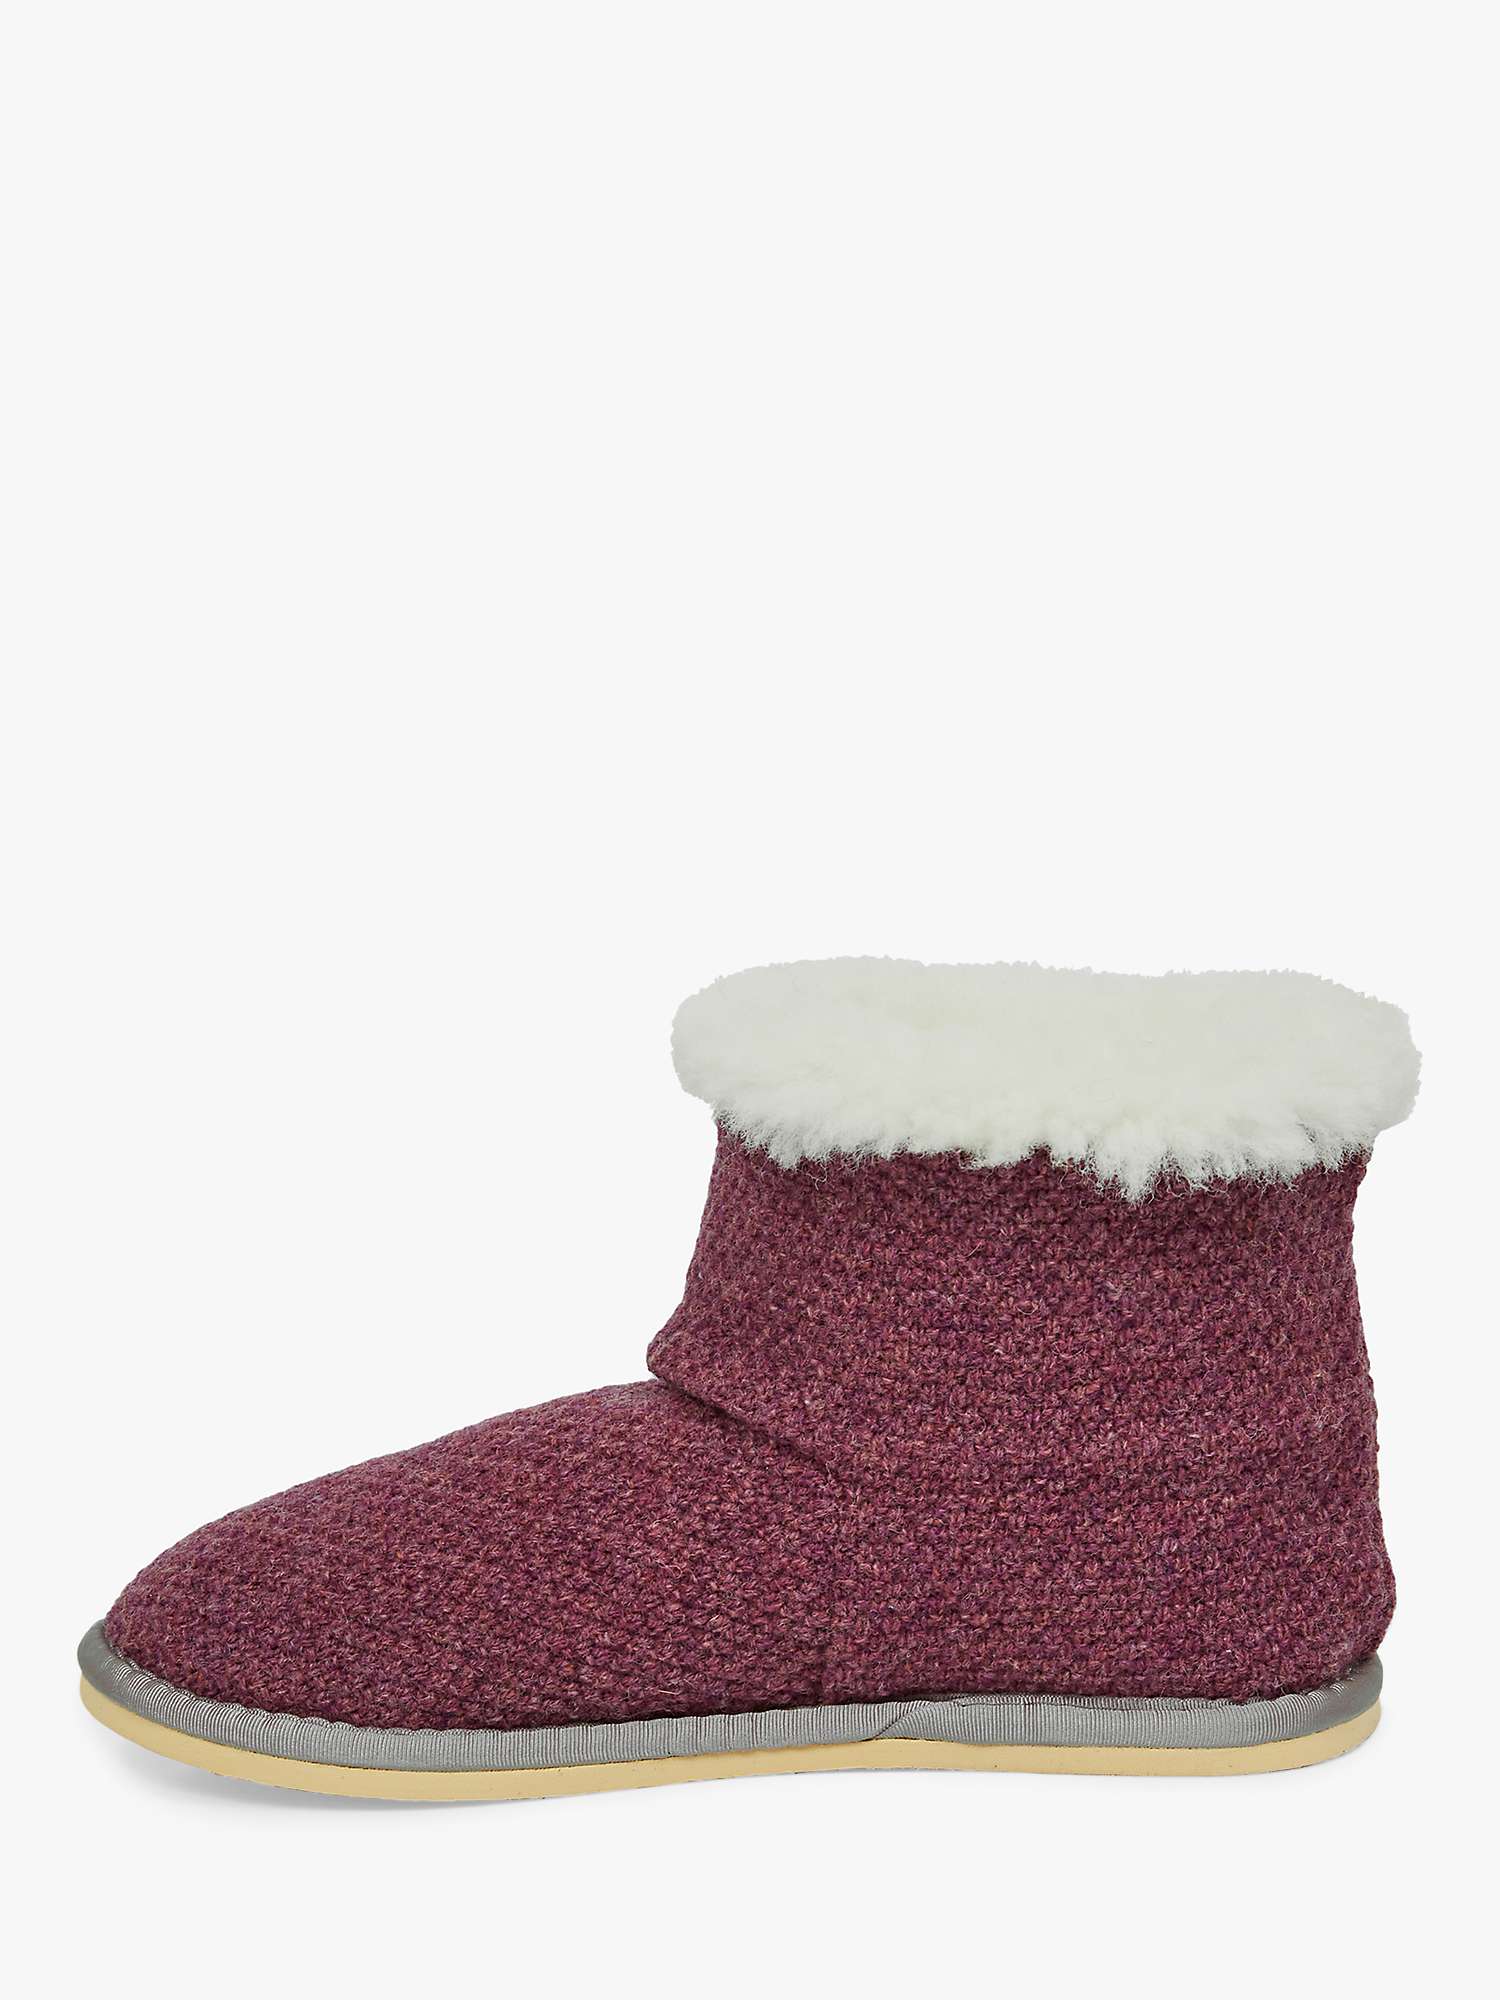 Buy Celtic & Co. Knitted Boot Slippers Online at johnlewis.com